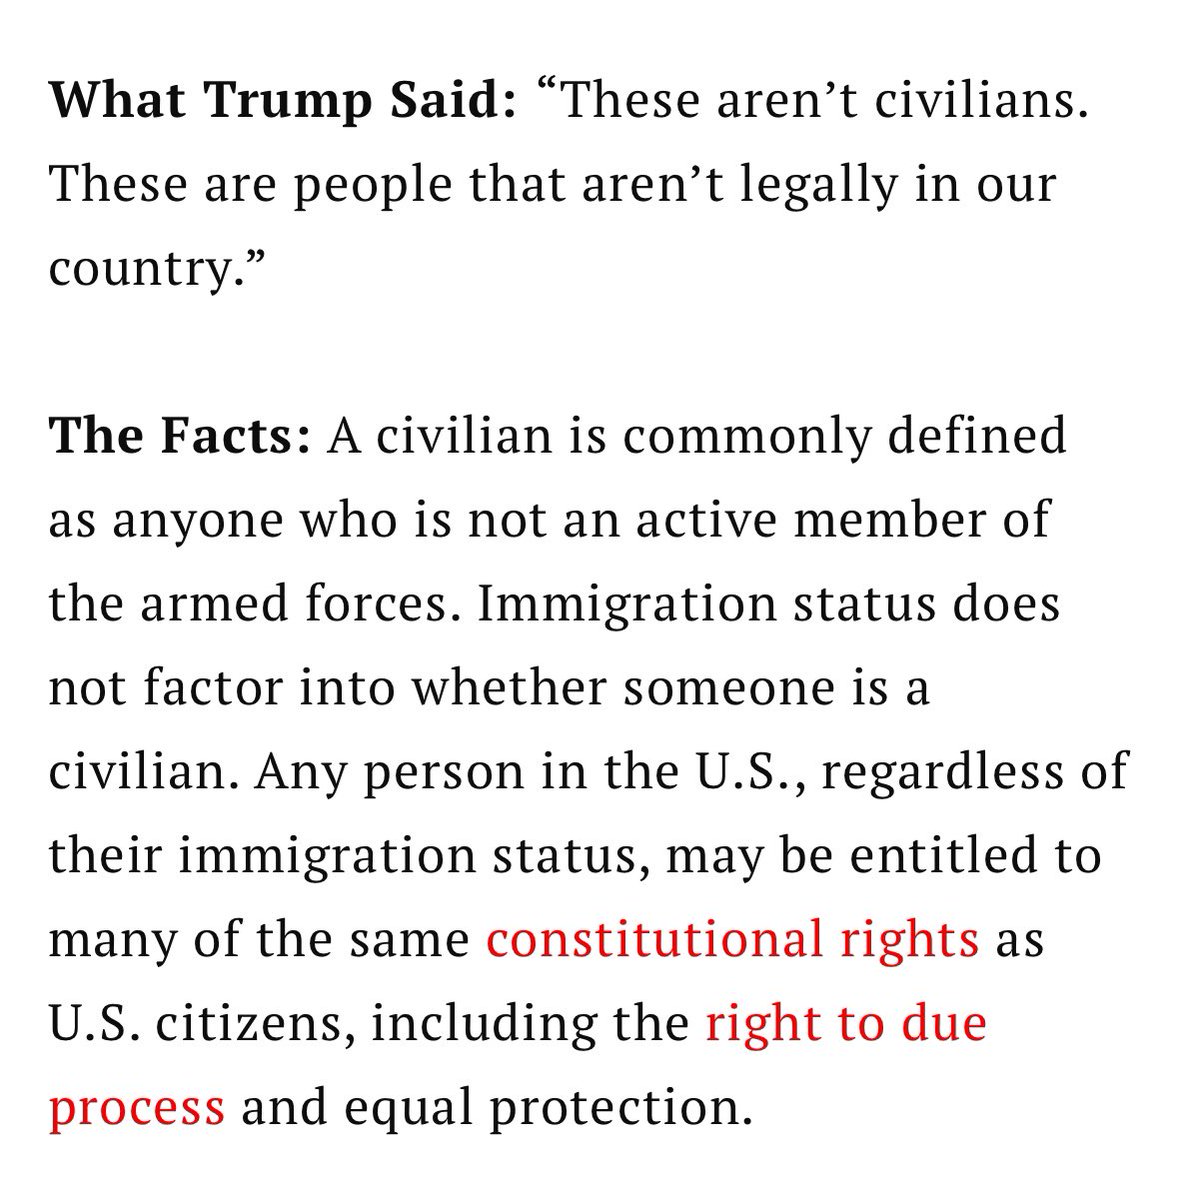 This Time Magazine fact check of Trump is wild. “Any person in the U.S., regardless of immigration status, may be due the same constitutional rights as U.S. citizens”? People invading our country? British soldiers during the War of 1812?